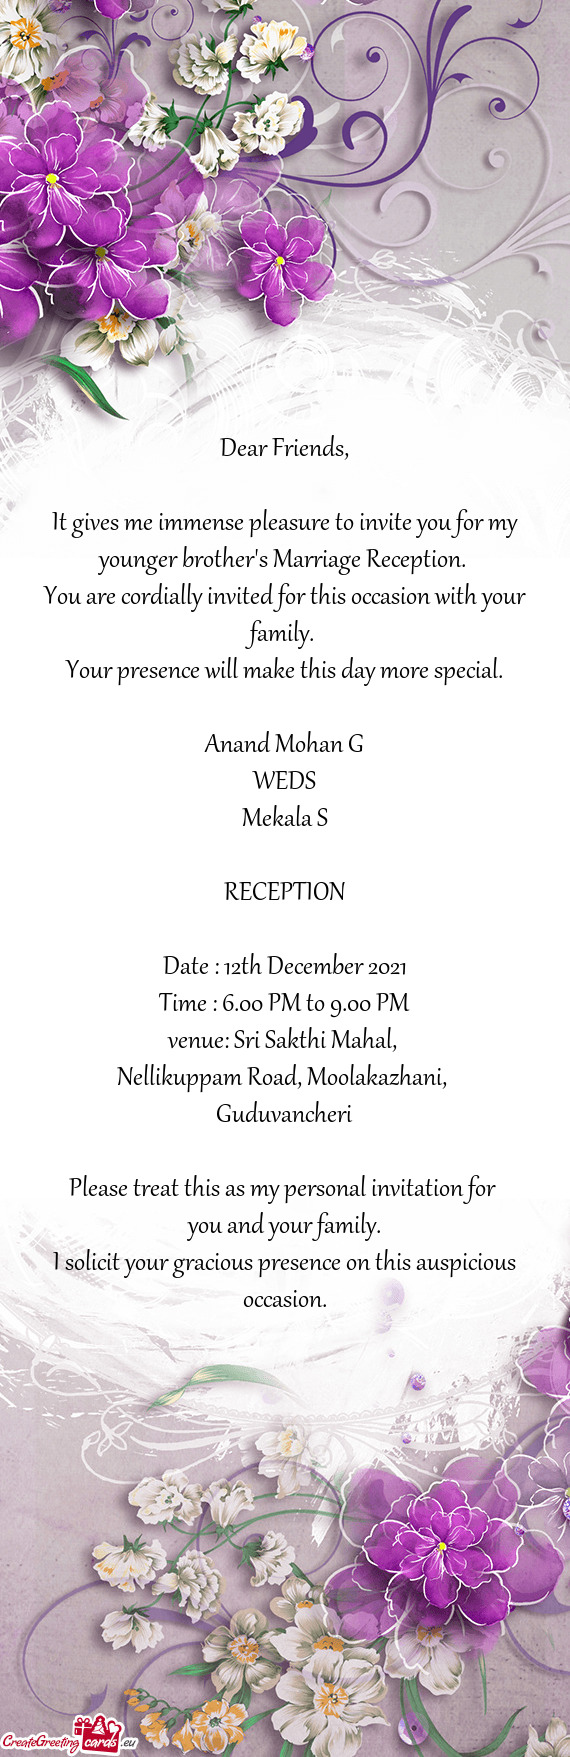 It gives me immense pleasure to invite you for my younger brother